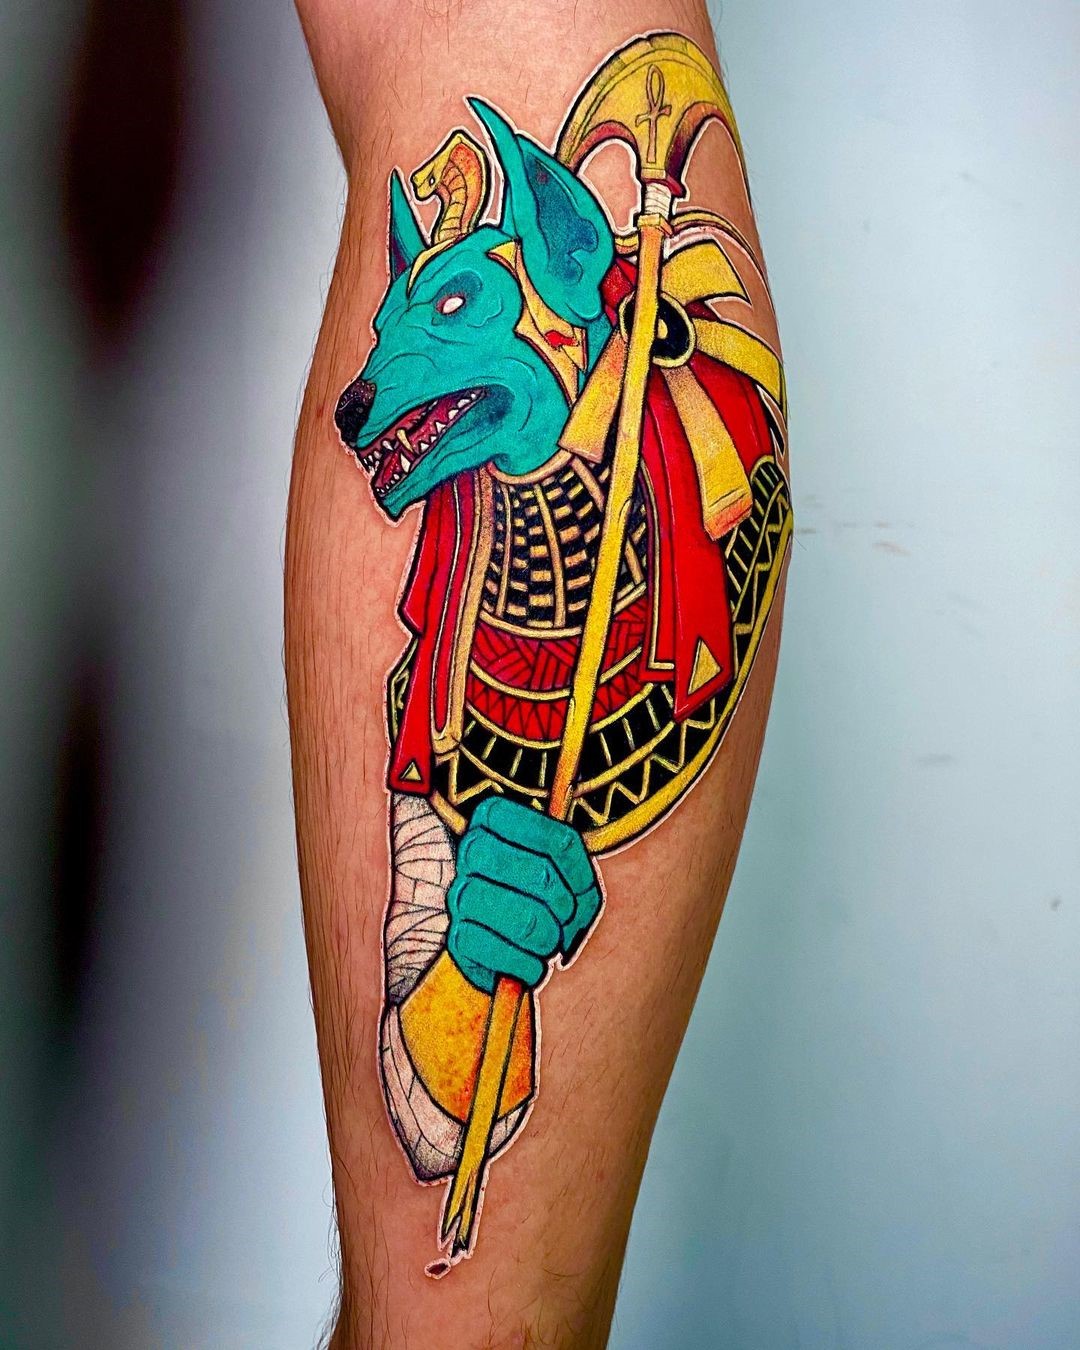 Loud & Colorful Anubis Ink